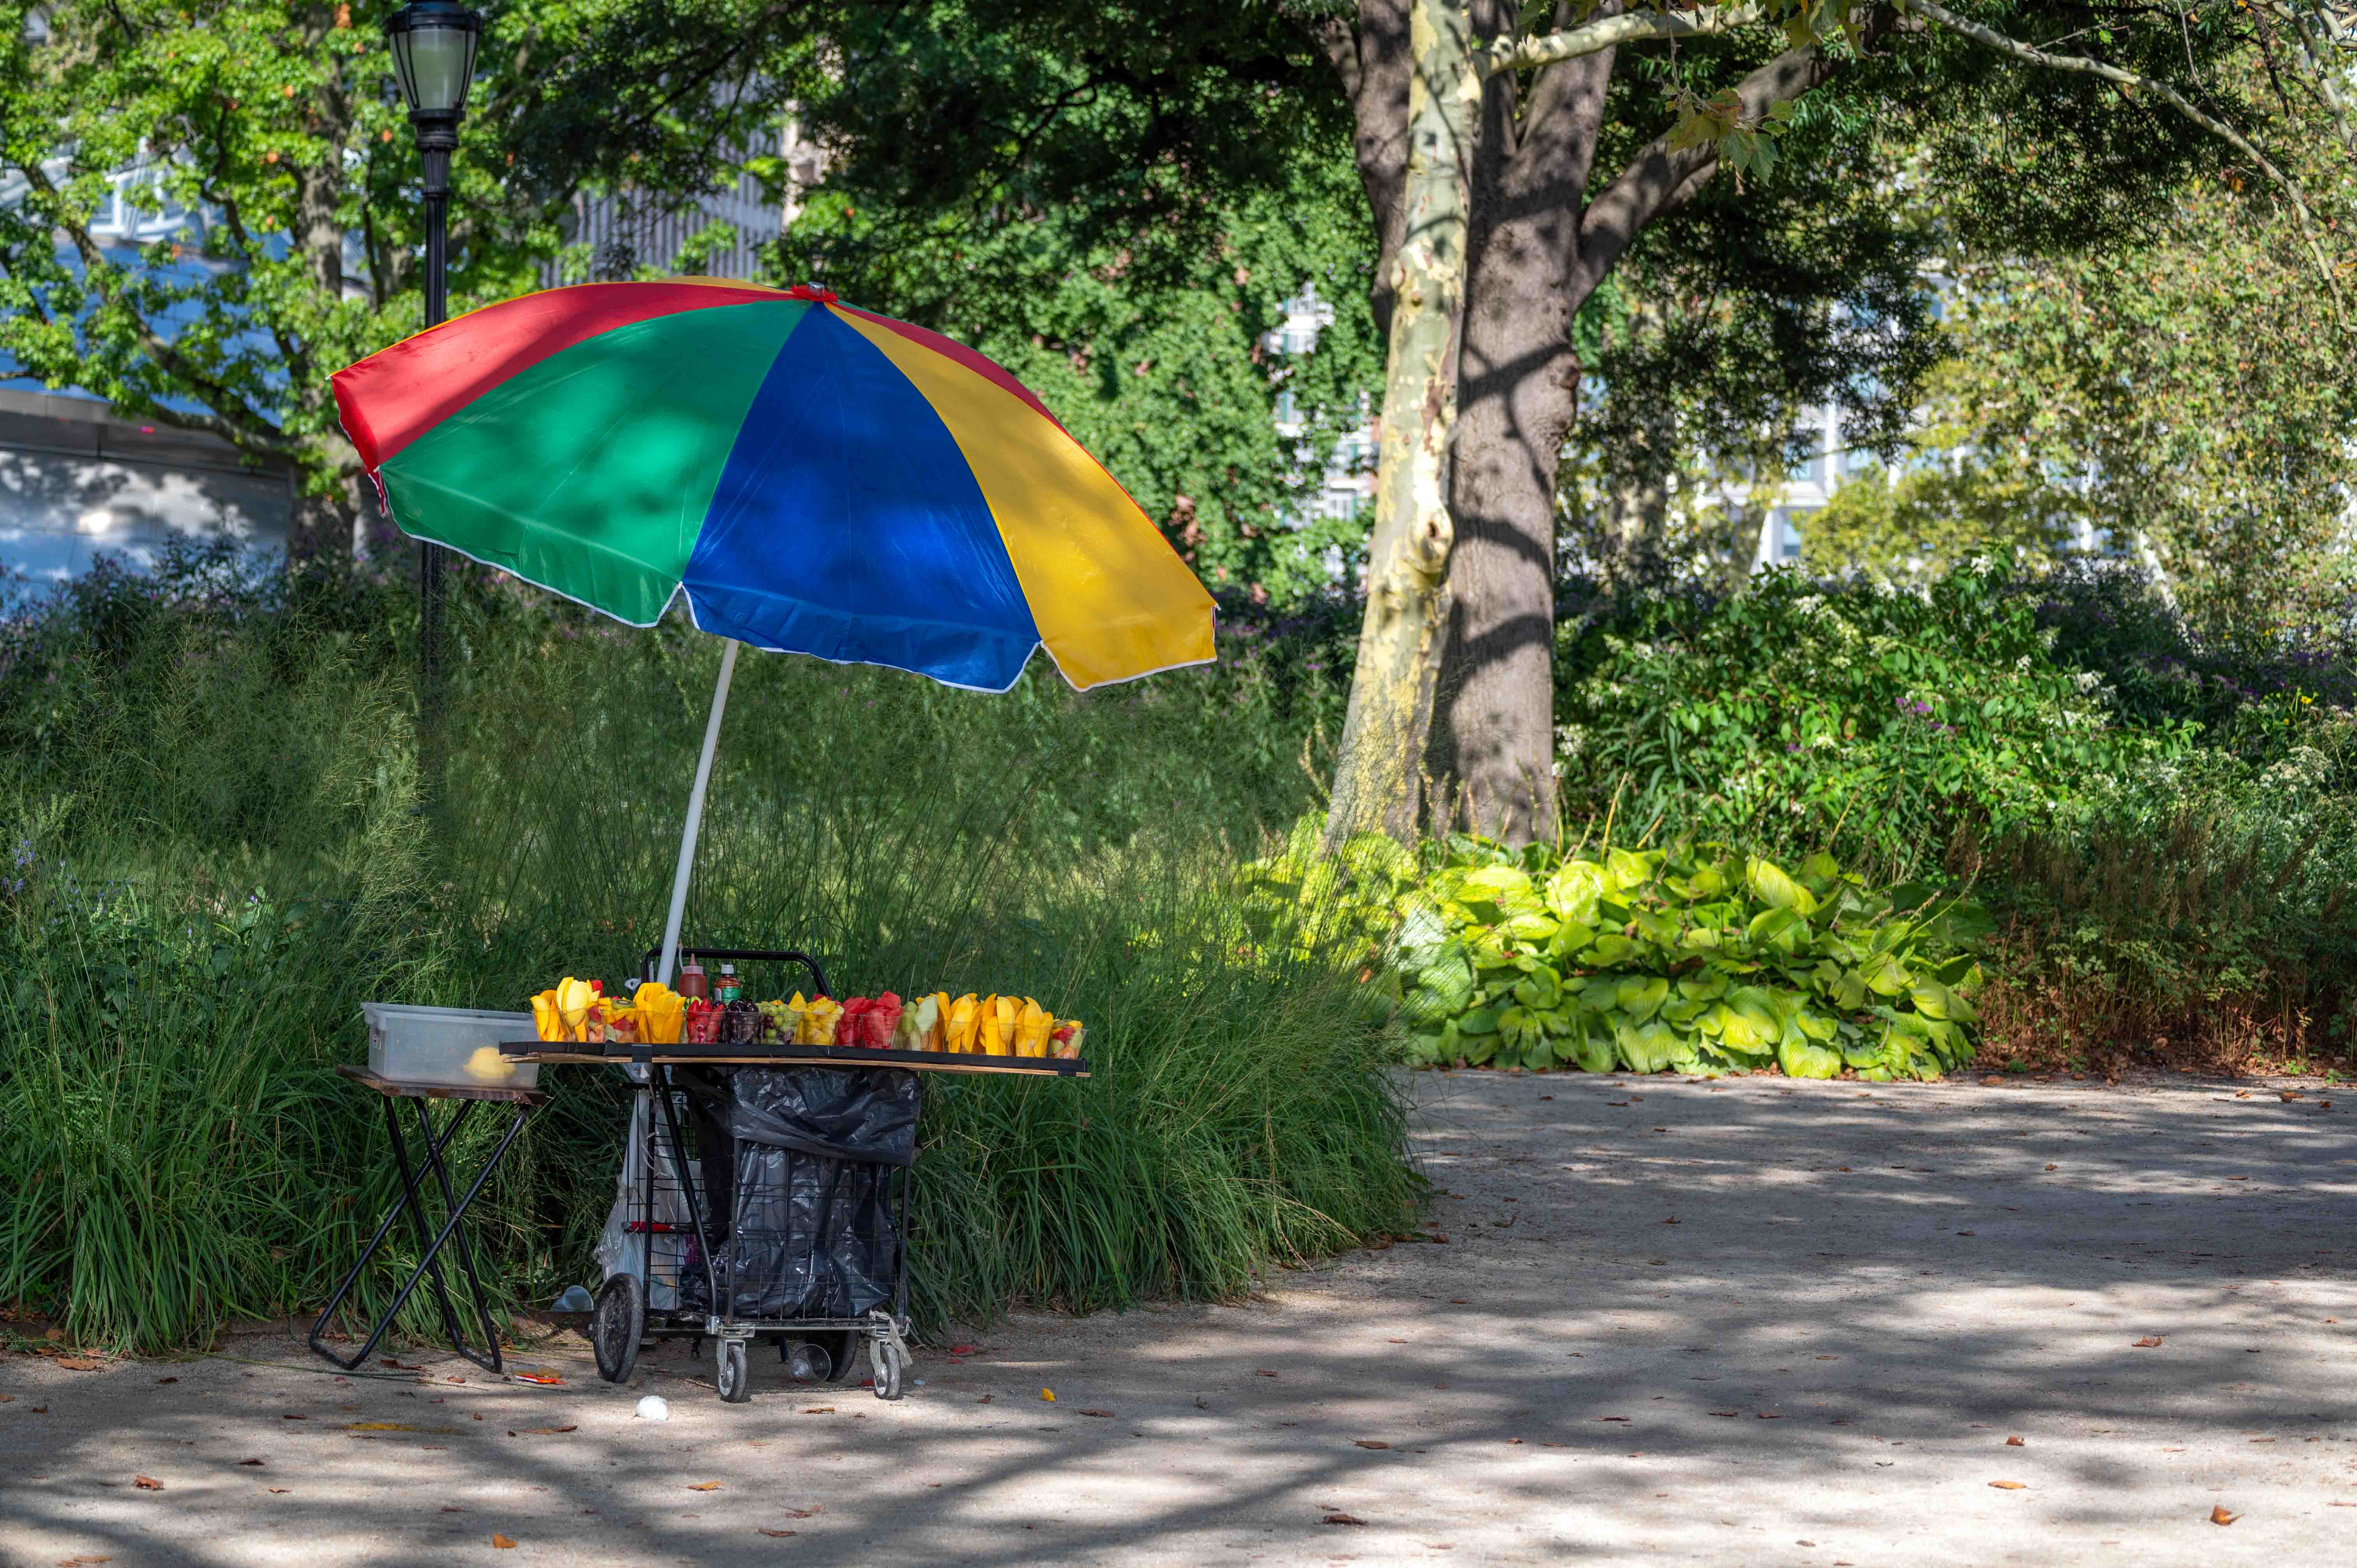 A fruit vendor stand with cut fruit in clear plastic cups on a walking path under the shade trees in Battery Park.